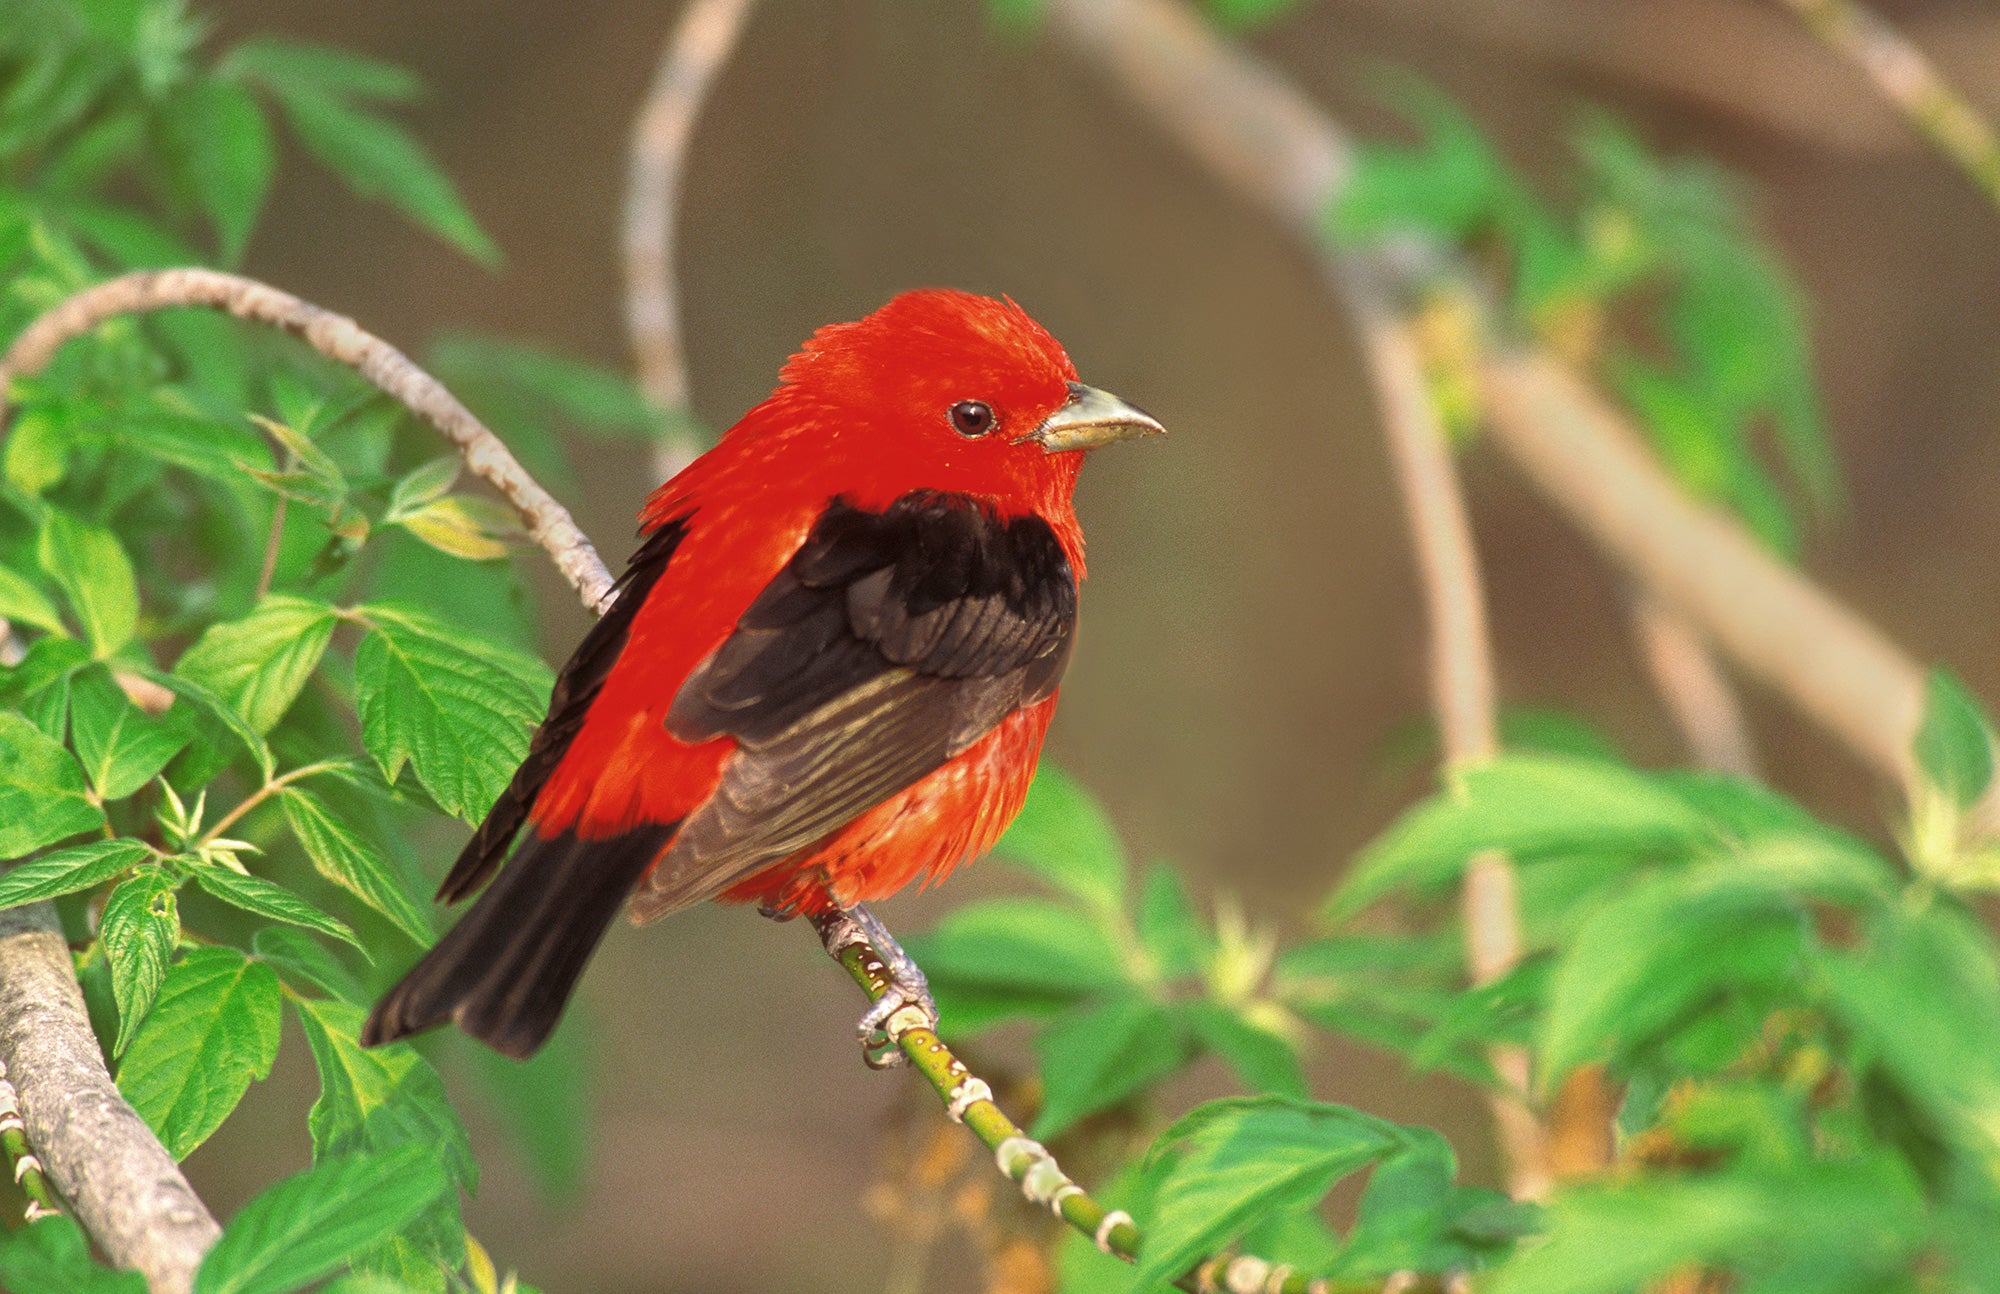 A small red and black scarlet tanager bird perched on a branch. End of image description.